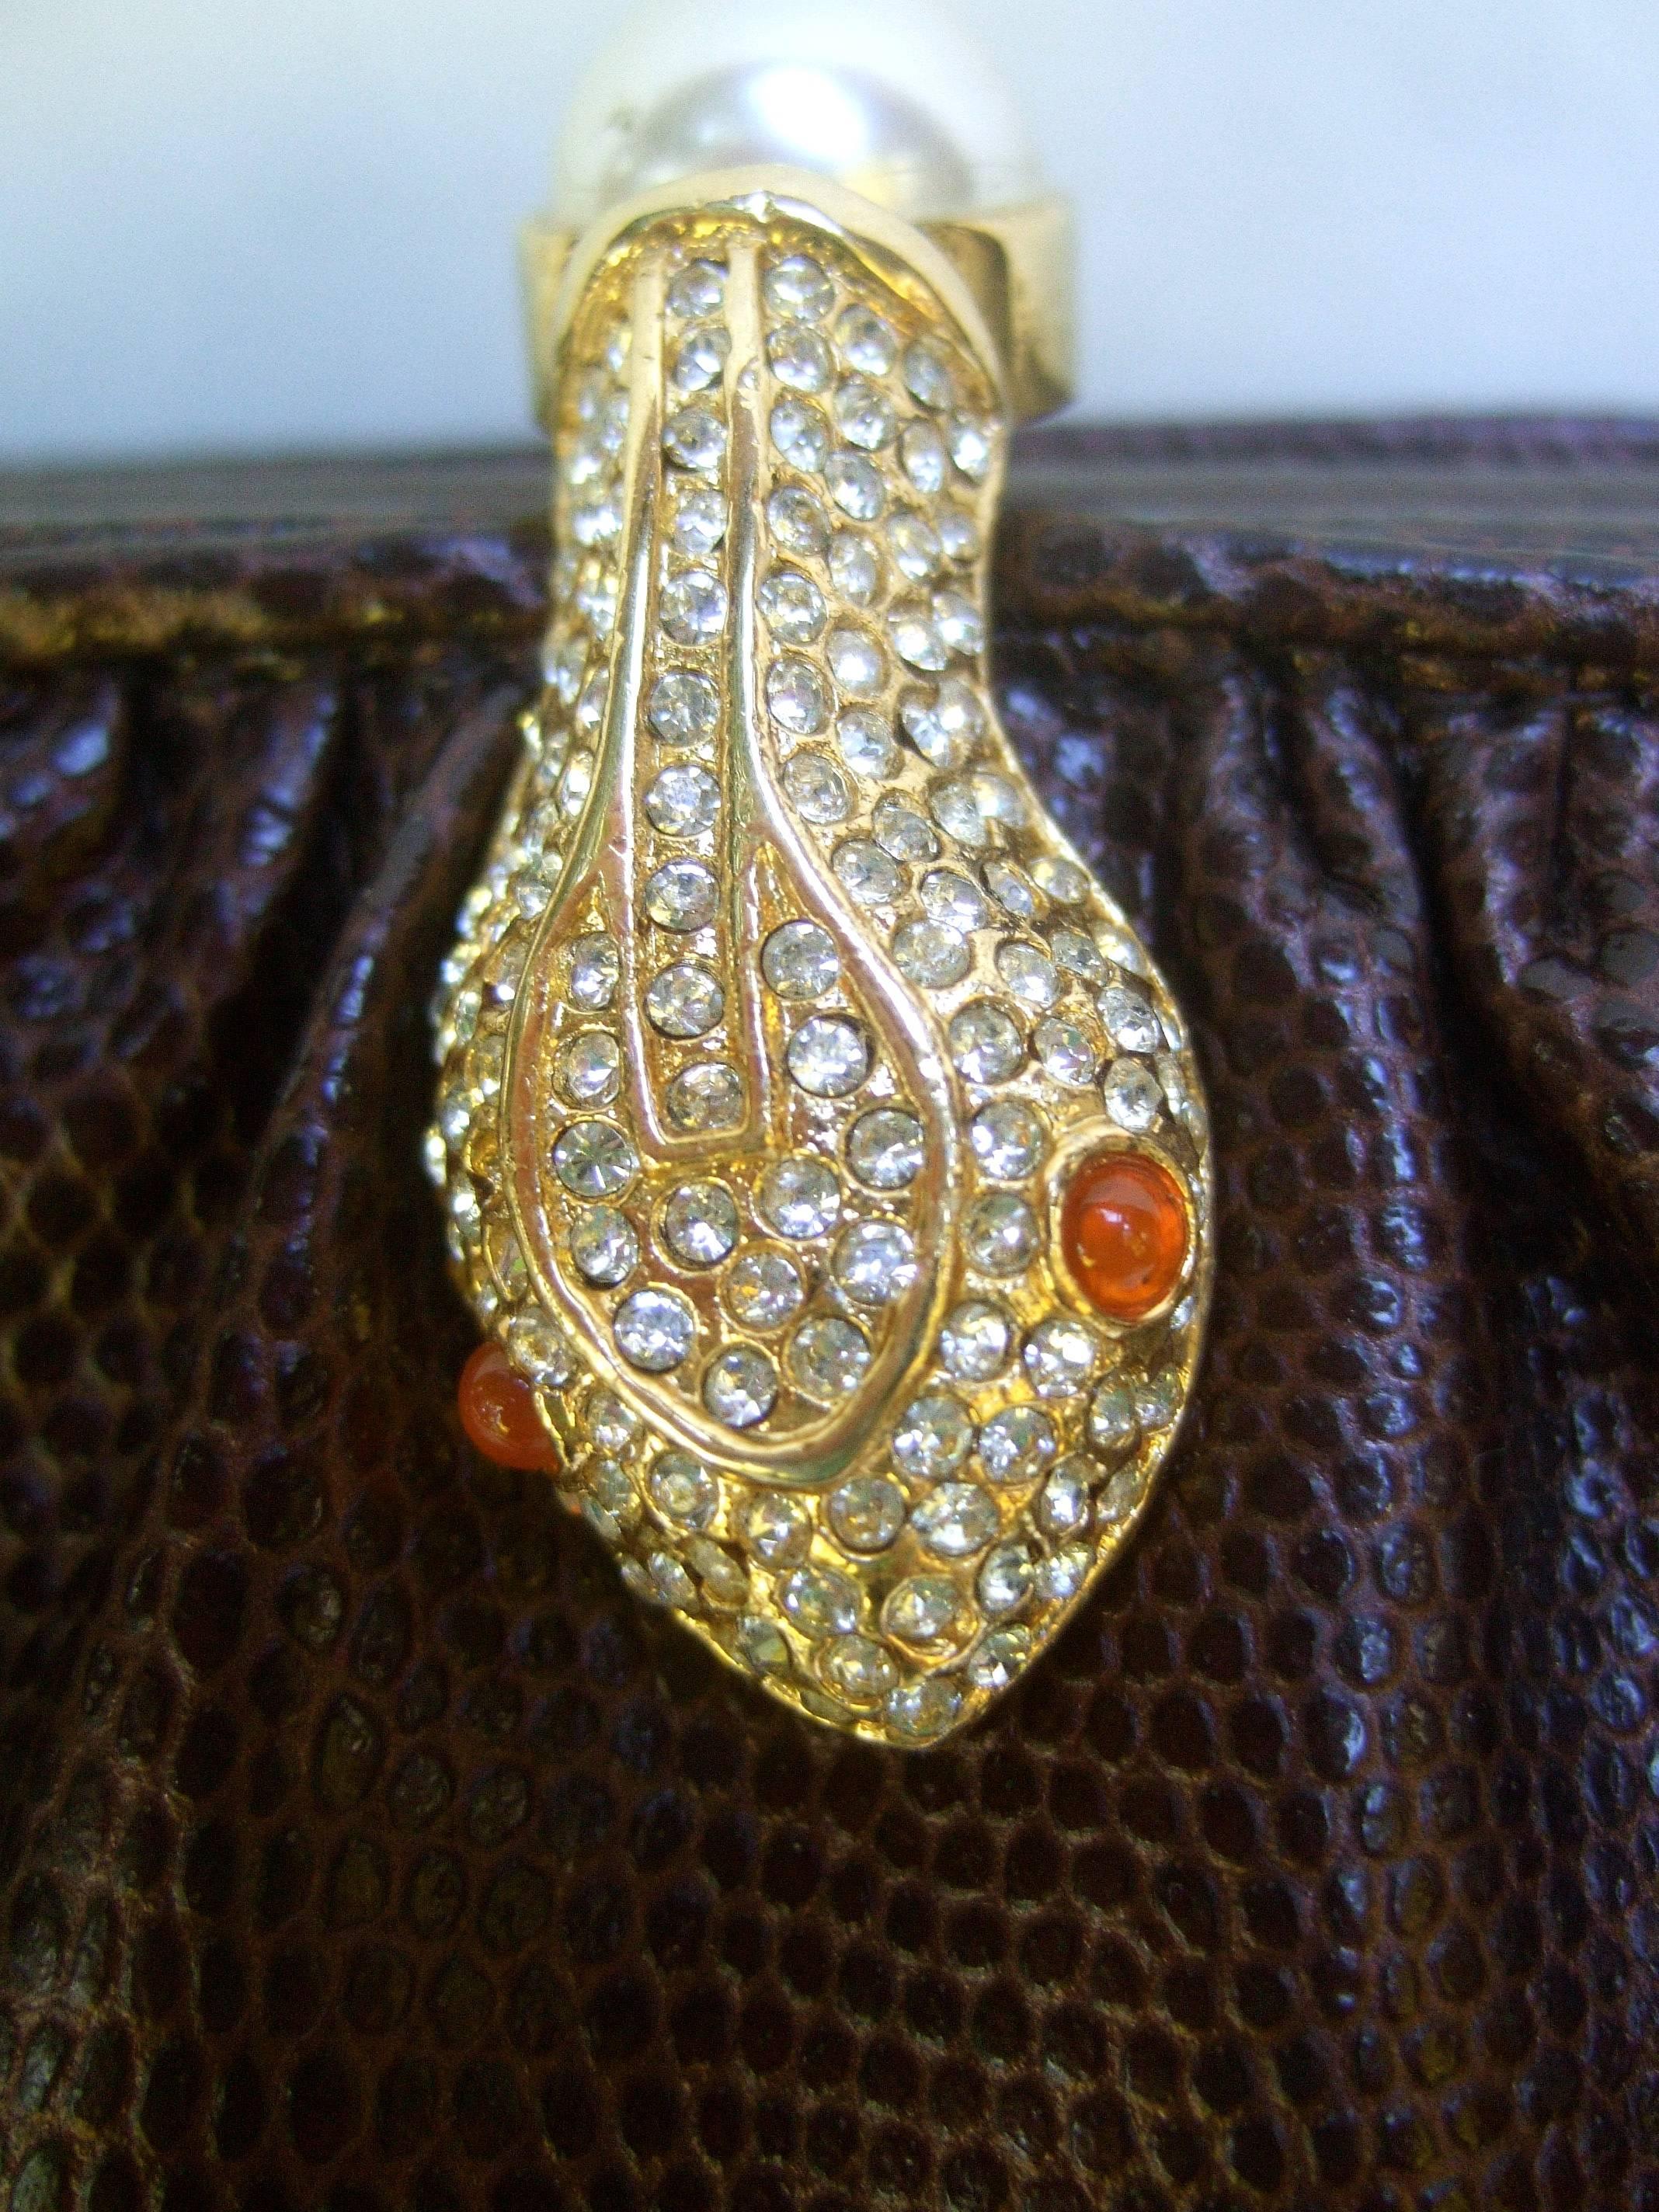 Opulent Jeweled Serpent Clasp Evening Bag In Excellent Condition For Sale In University City, MO